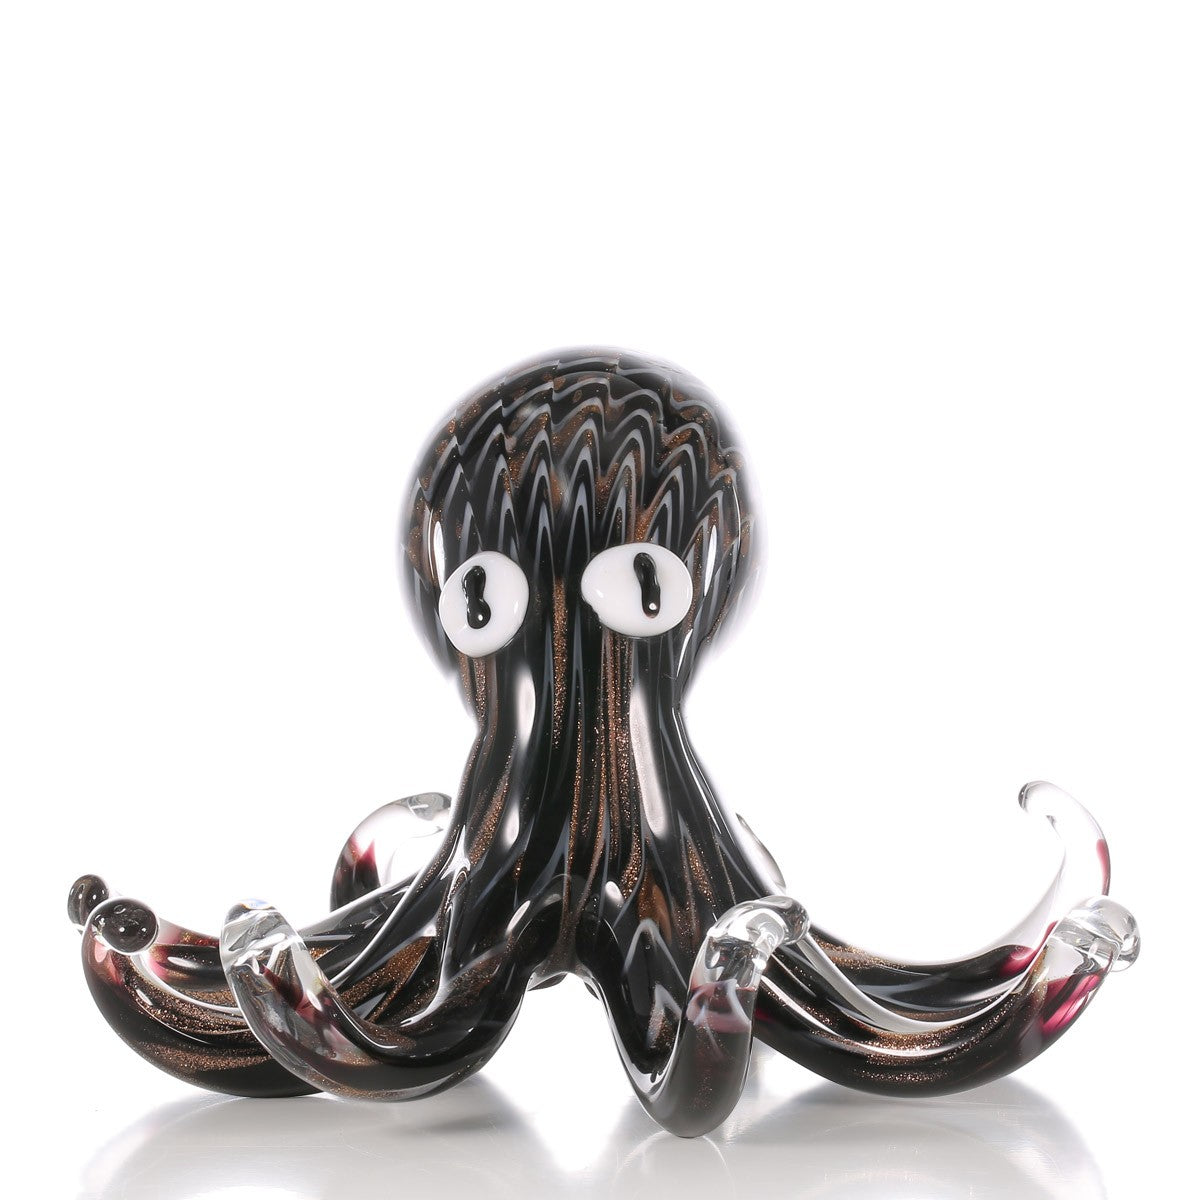 Octopus Decor and Octopus Home Decor with Glass Octopus for Christmas Gifts and Christmas Ornaments